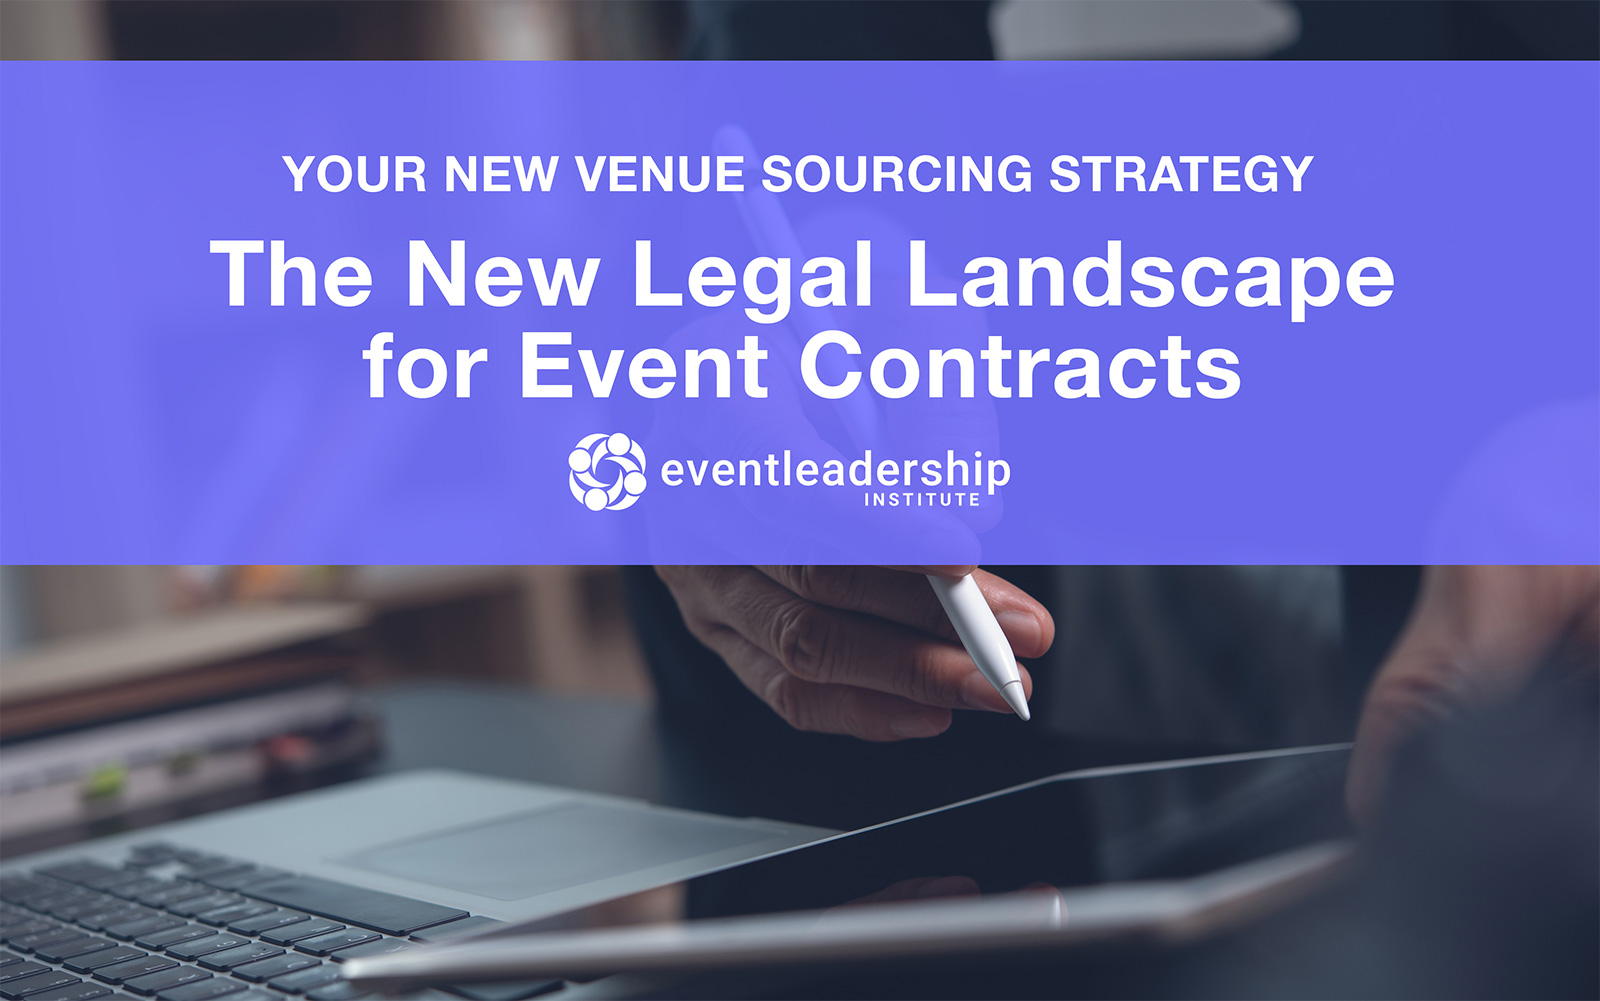 Your New Venue Sourcing Strategy: The New Legal Landscape for Event Contracts (Recorded July 14, 2021)